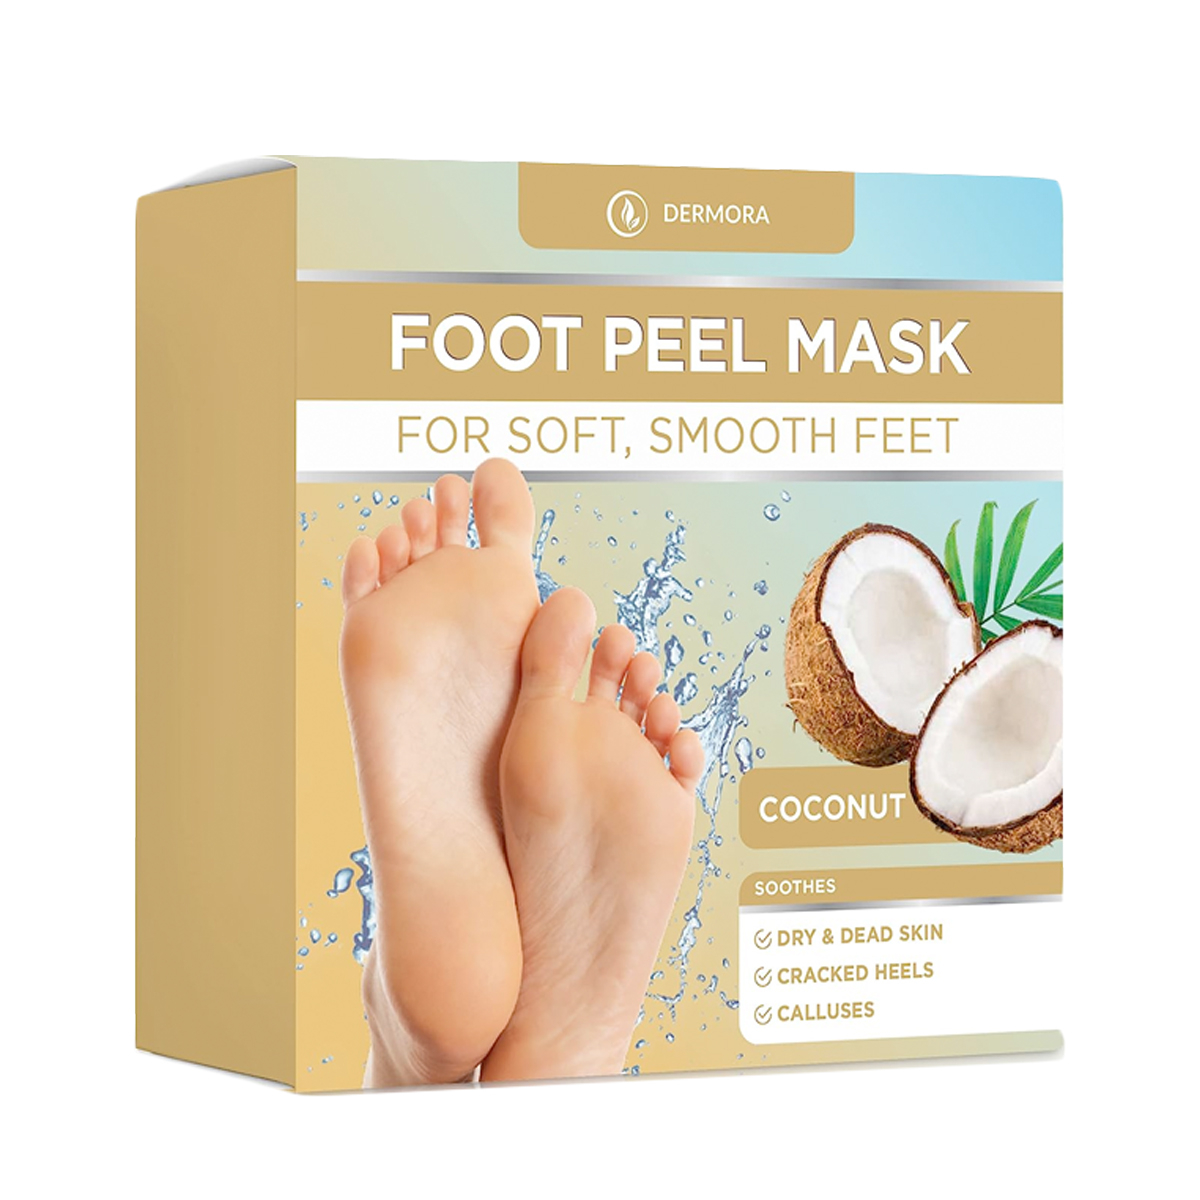 https://akns-images.eonline.com/eol_images/Entire_Site/2023530/rs_1200x1200-230630155517-1200-foot-peel-mask.jpg?fit=around%7C1200:1200&output-quality=90&crop=1200:1200;center,top